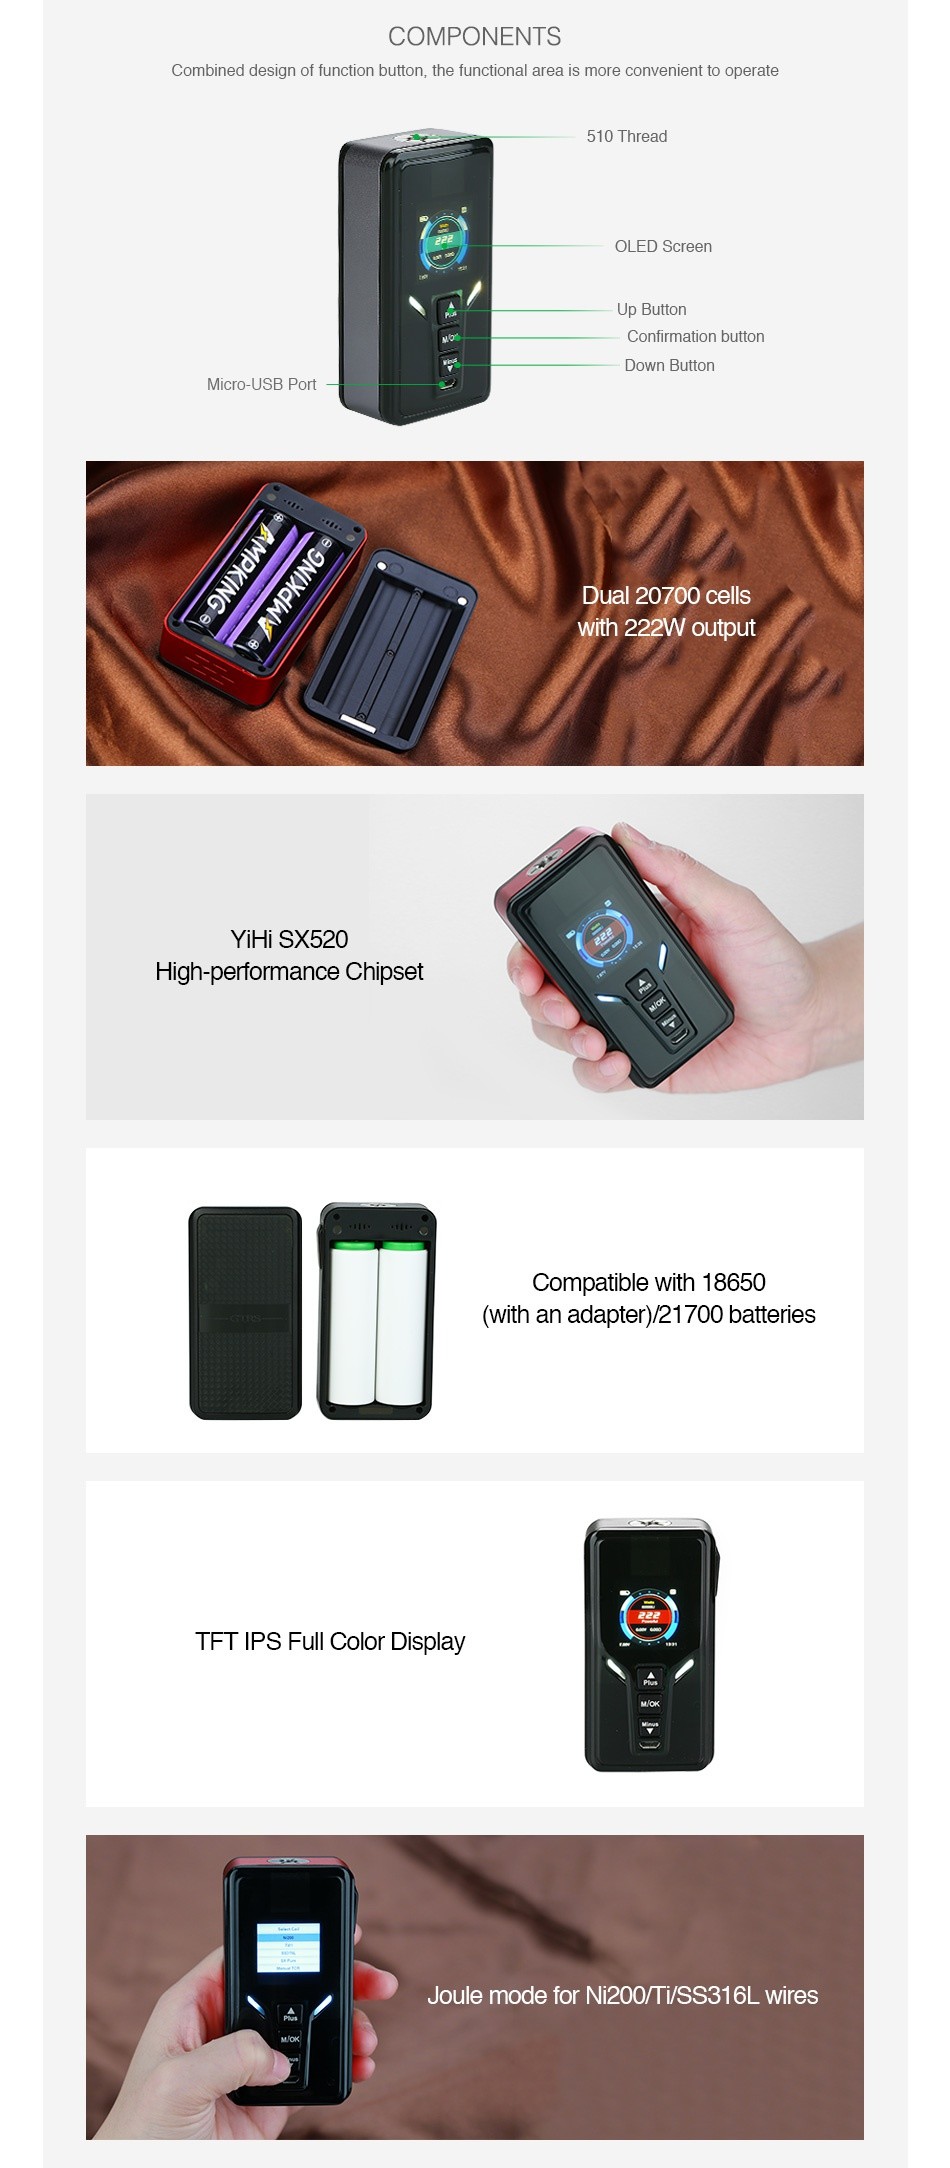 GTRS VBOY 222W 20700 TC Box MOD with SX520 Chip COMPONENTS Combined design of function button  the functional area is more convenient to operate 510 Thread OLED Screen Confirmation button Down Button Micro USB Port Dual 20700 cells with 222W output YiHi SX520 High performance Chipset Compatible with 18650  with an adapter   21700 batteries TFT IPS Full Color Display Joule mode for ni2ooti ss316l wires